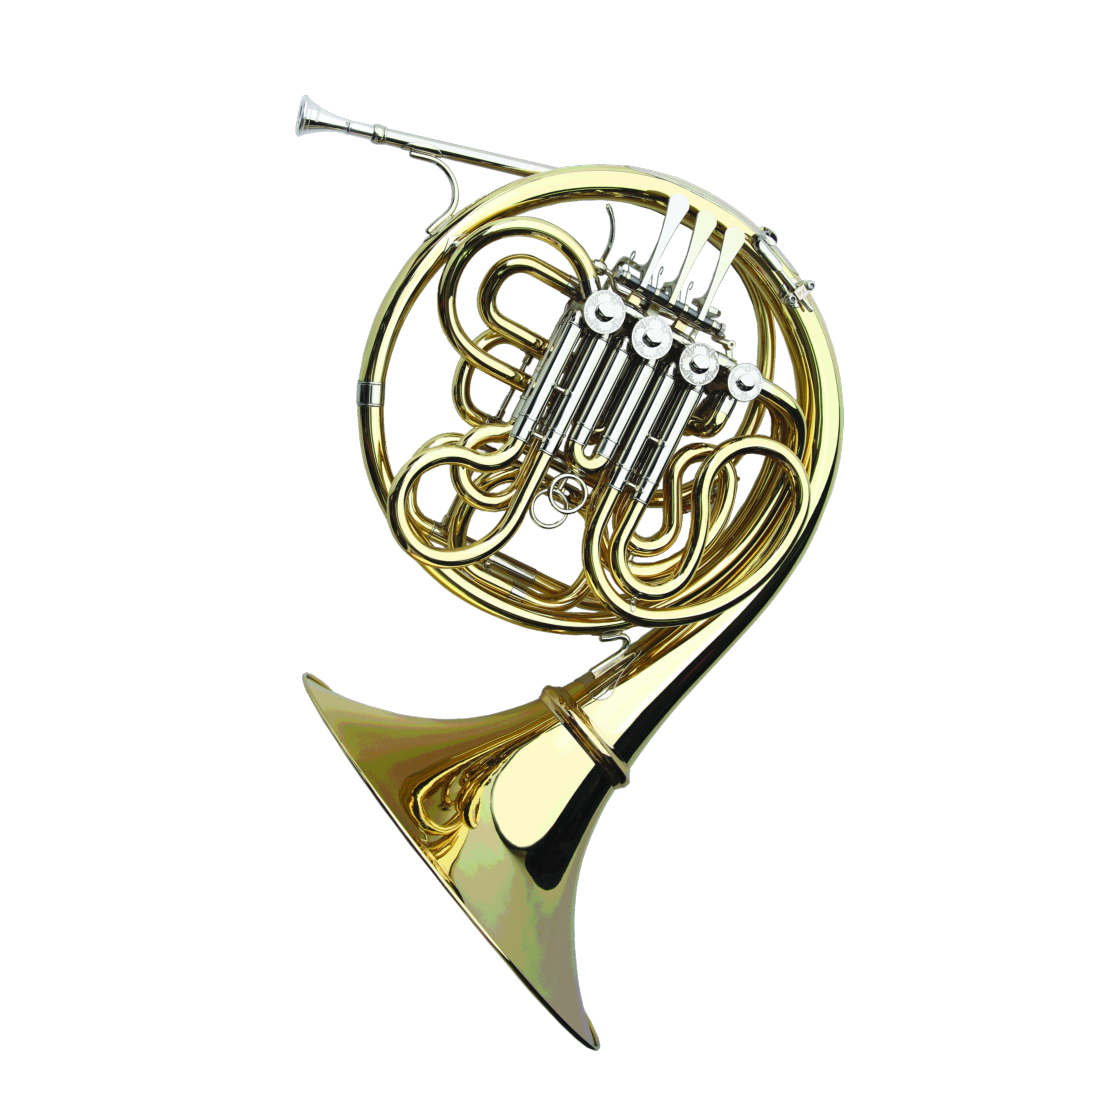 Paxman - Academy Series 4 Bb/F Full Double French Horn-French Horn-Paxman-Music Elements